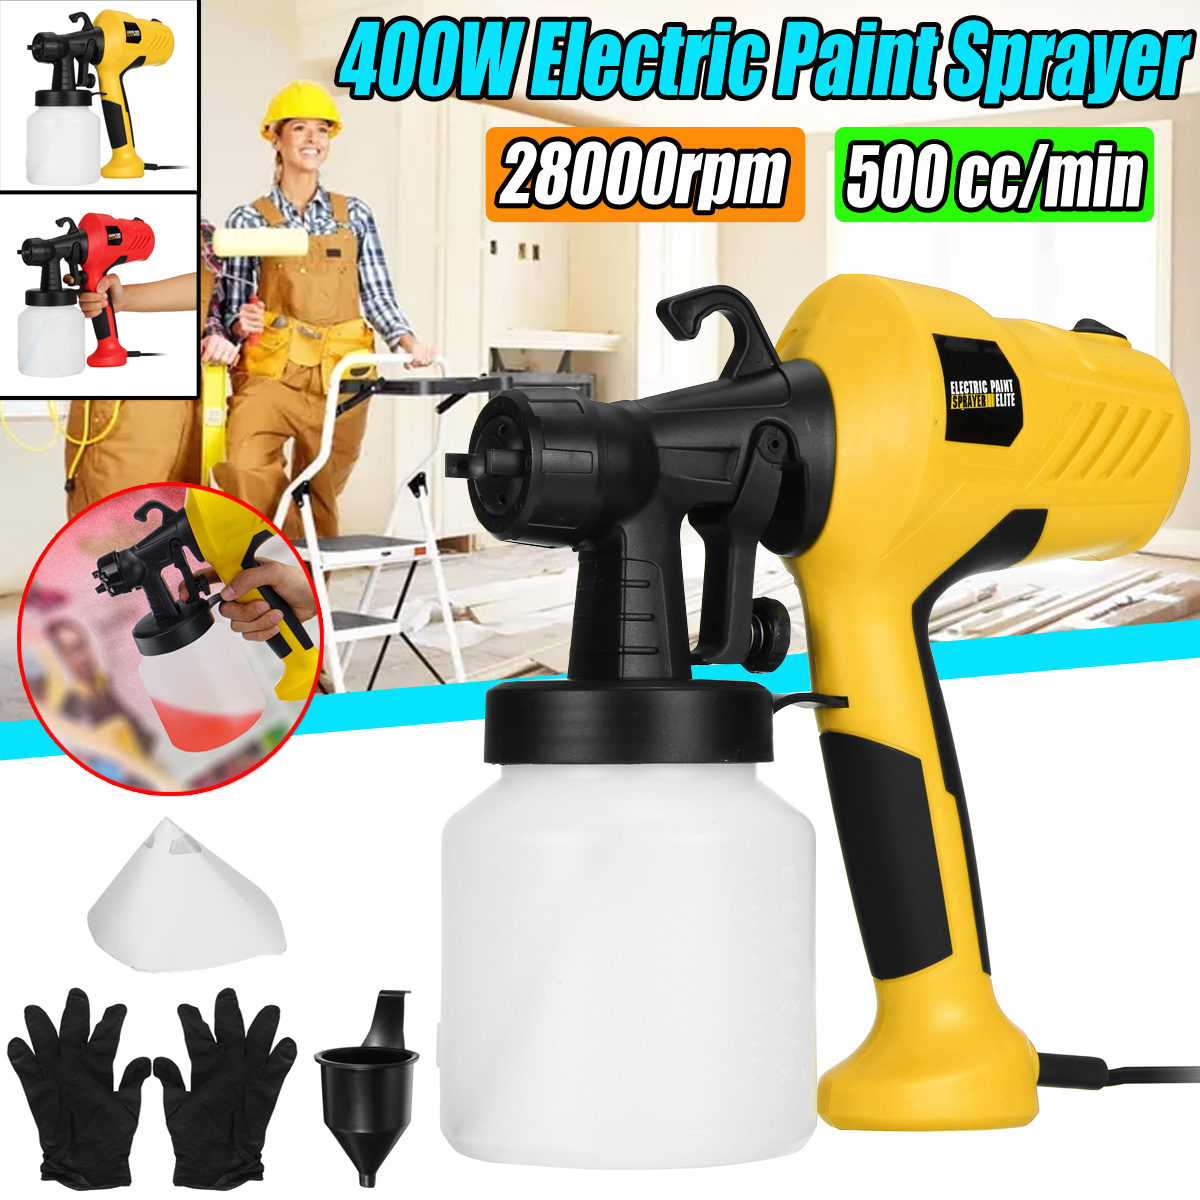 Electric-Spray-Paint-Sprayer-Compressor-for-Car-Wood-Wall-with-Flow-Control-1701162-1